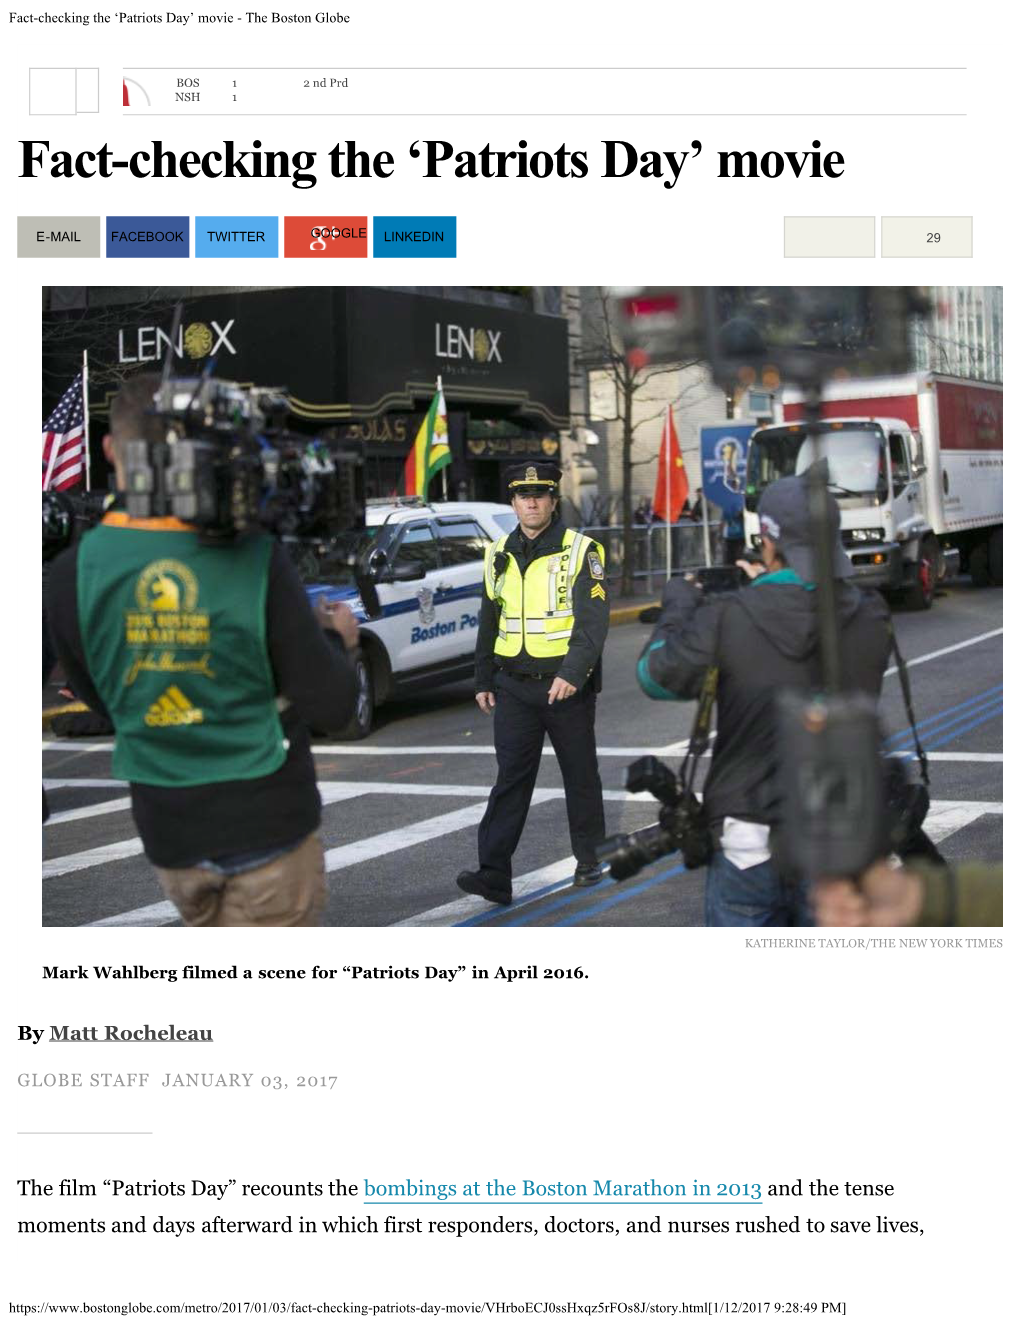 Fact-Checking the 'Patriots Day' Movie